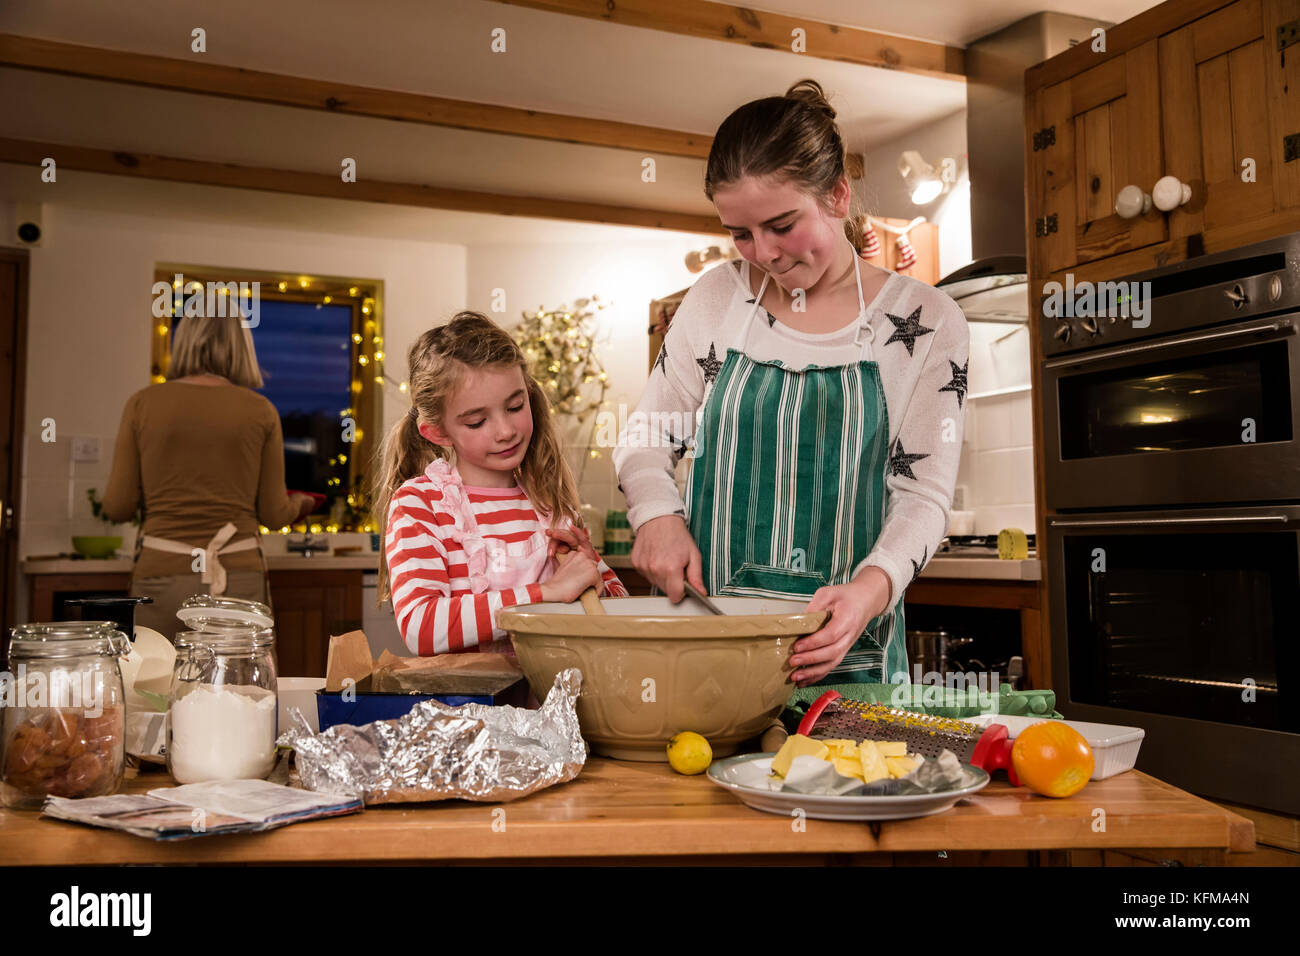 Two sisters are baking cakes in the kitchen with their grandmother. The girls are mixing ingredients. Stock Photo